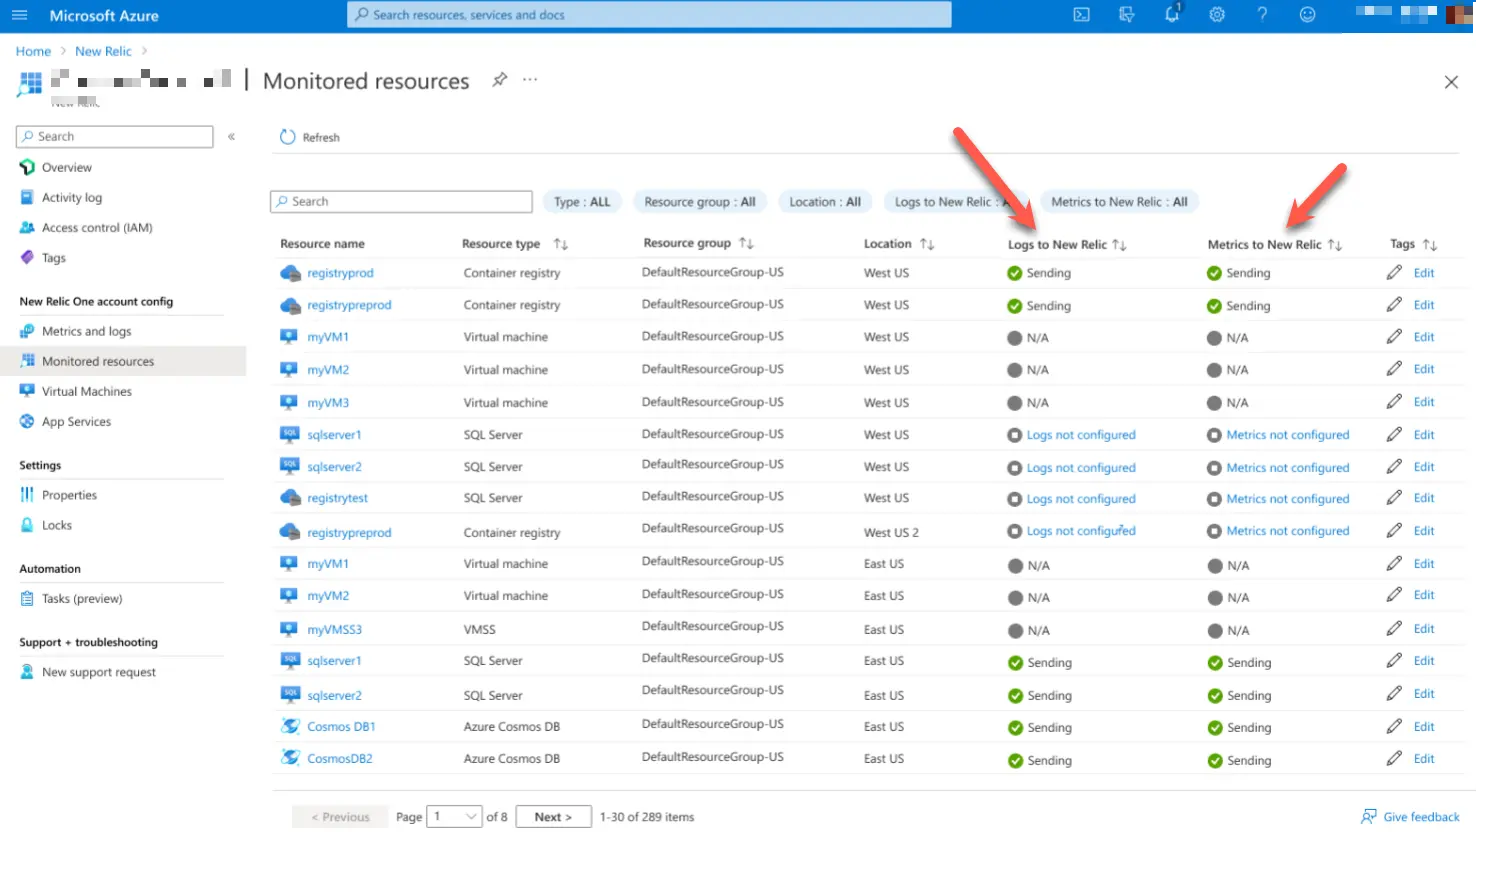 An image showing the monitor resources tab of azure